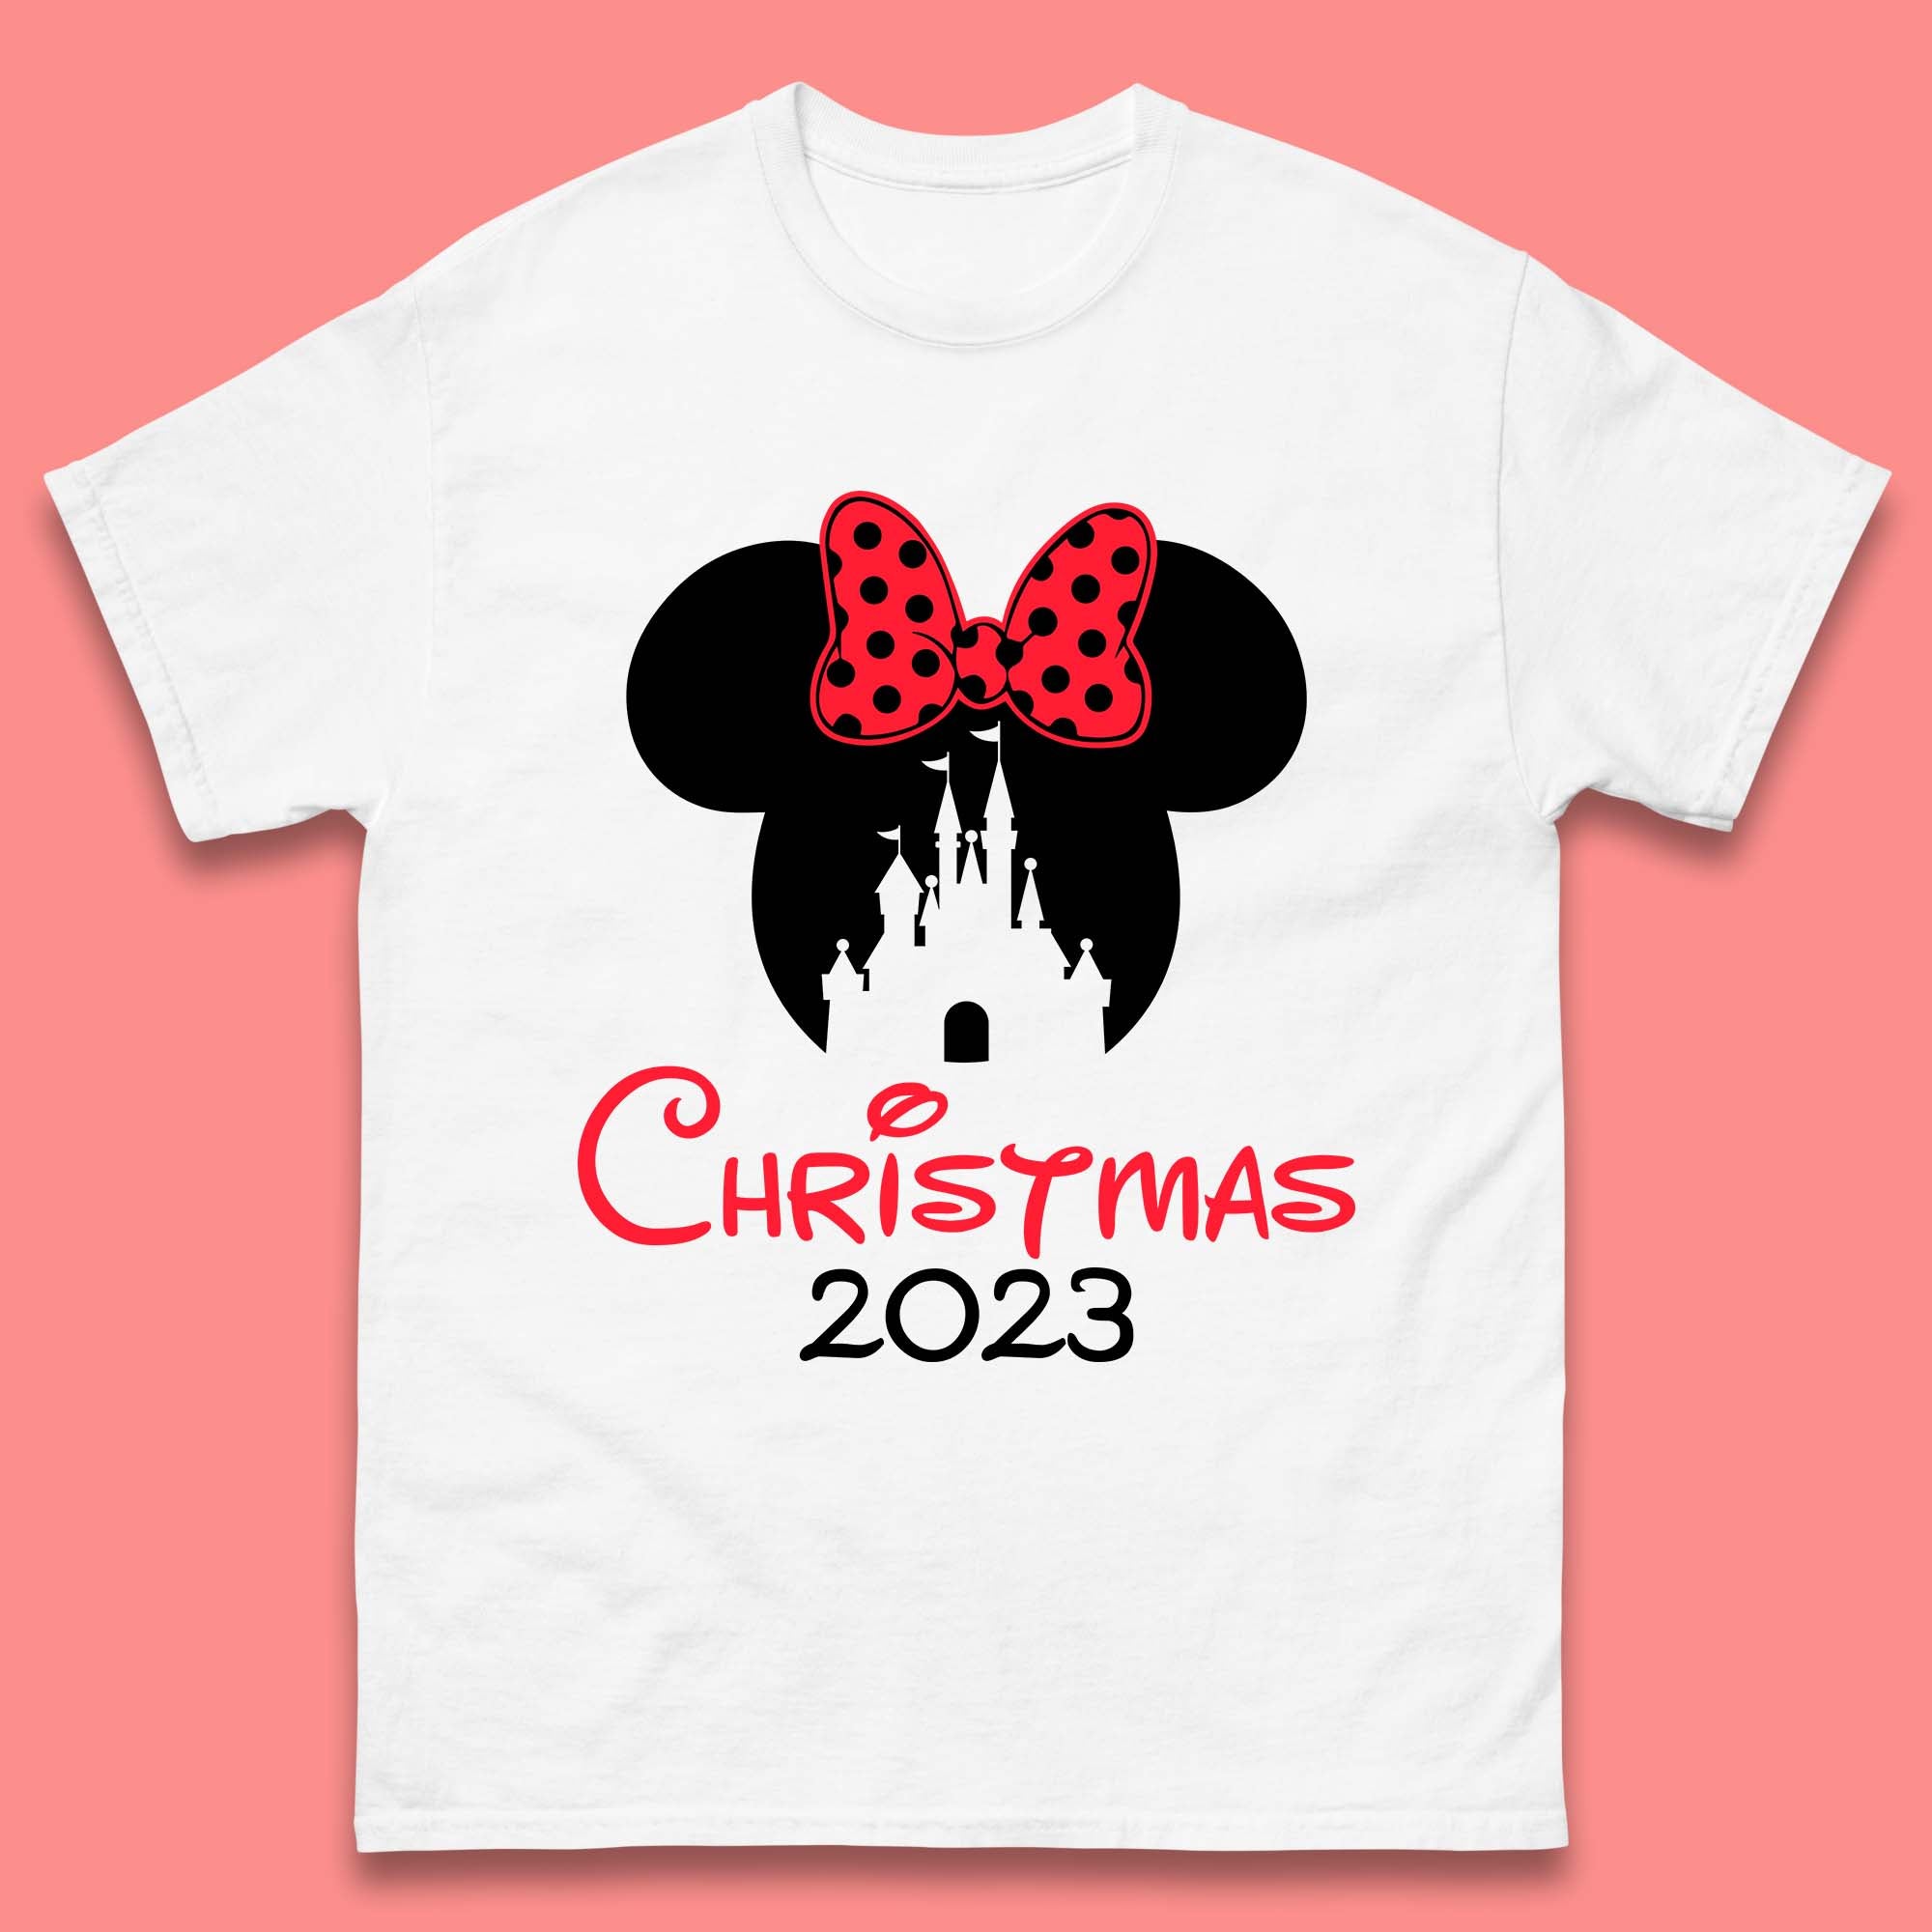 Christmas 2023 Mickey Mouse Minnie Mouse Magic Castle Holiday Xmas Disneyland Trip Mens Tee Top